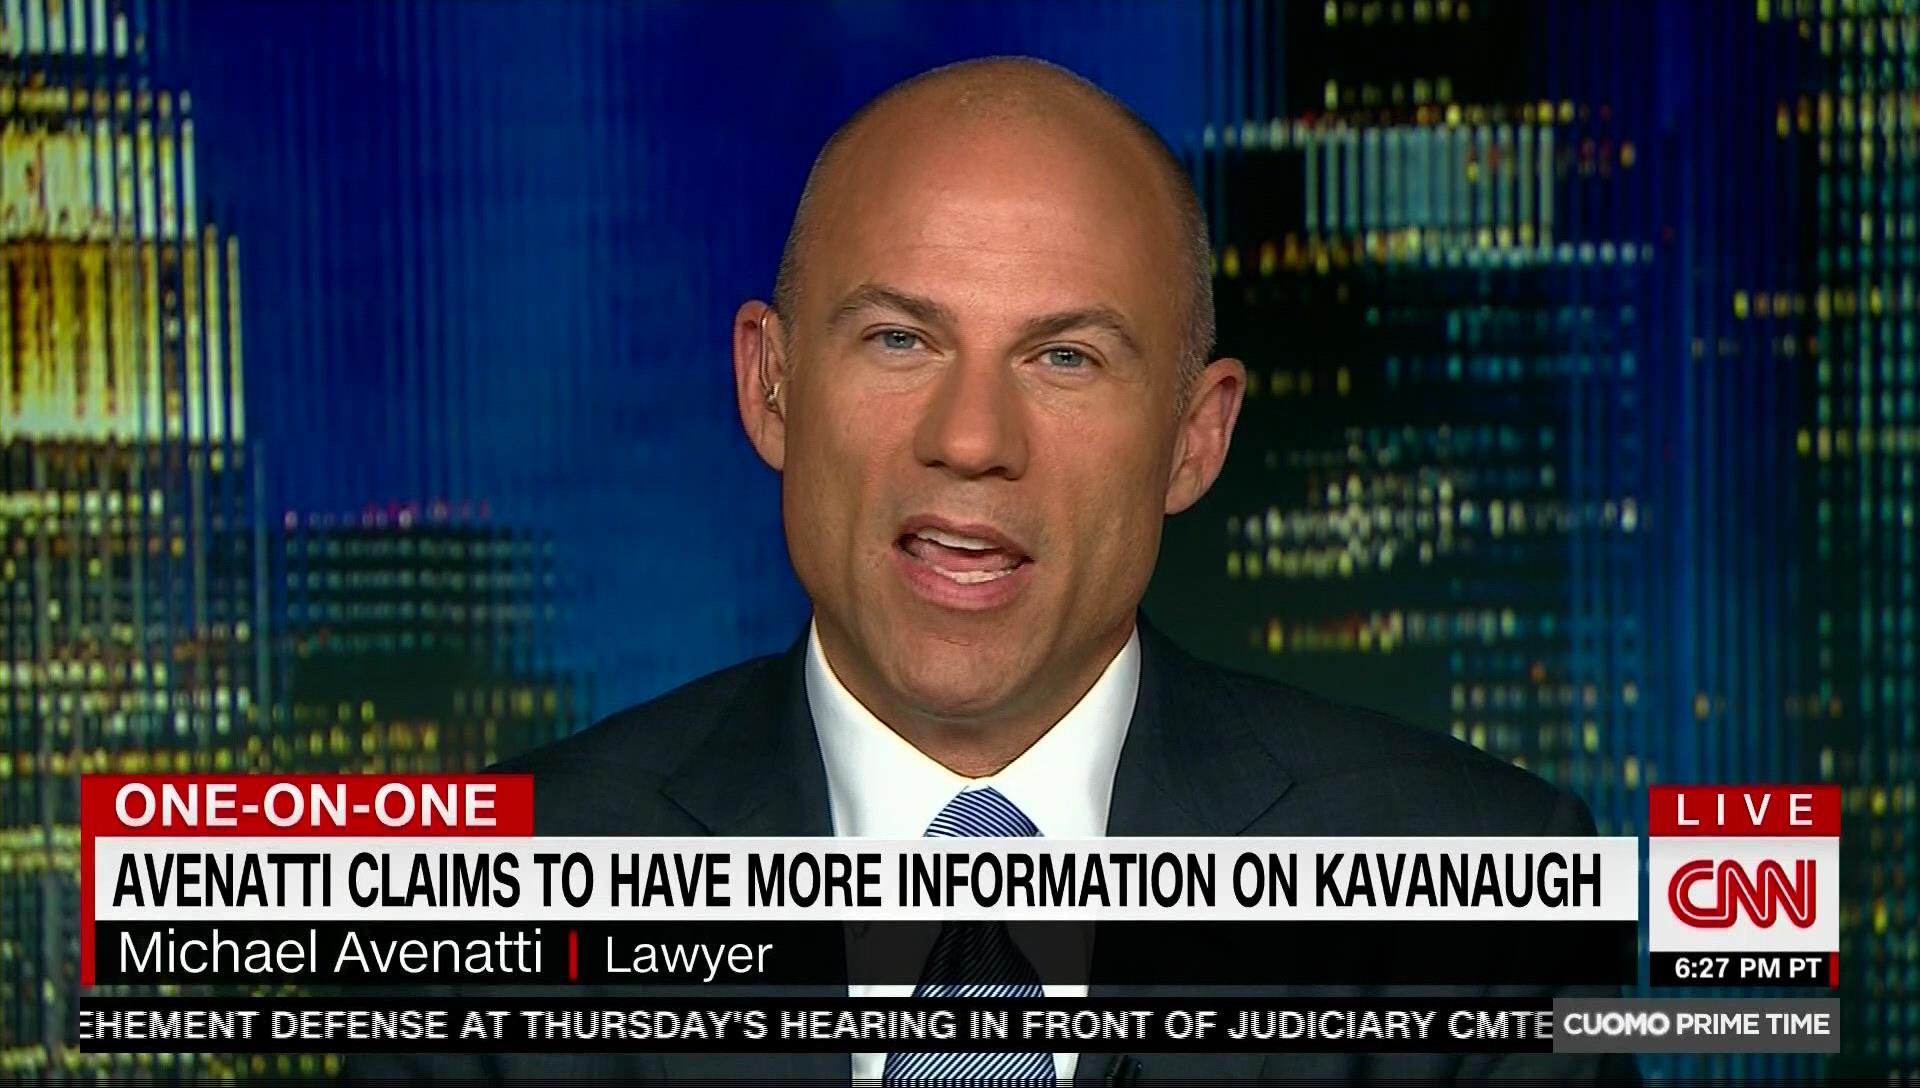 Michael Avenatti Appears On CNN And MSNBC Simultaneously For ‘Live’ Interviews